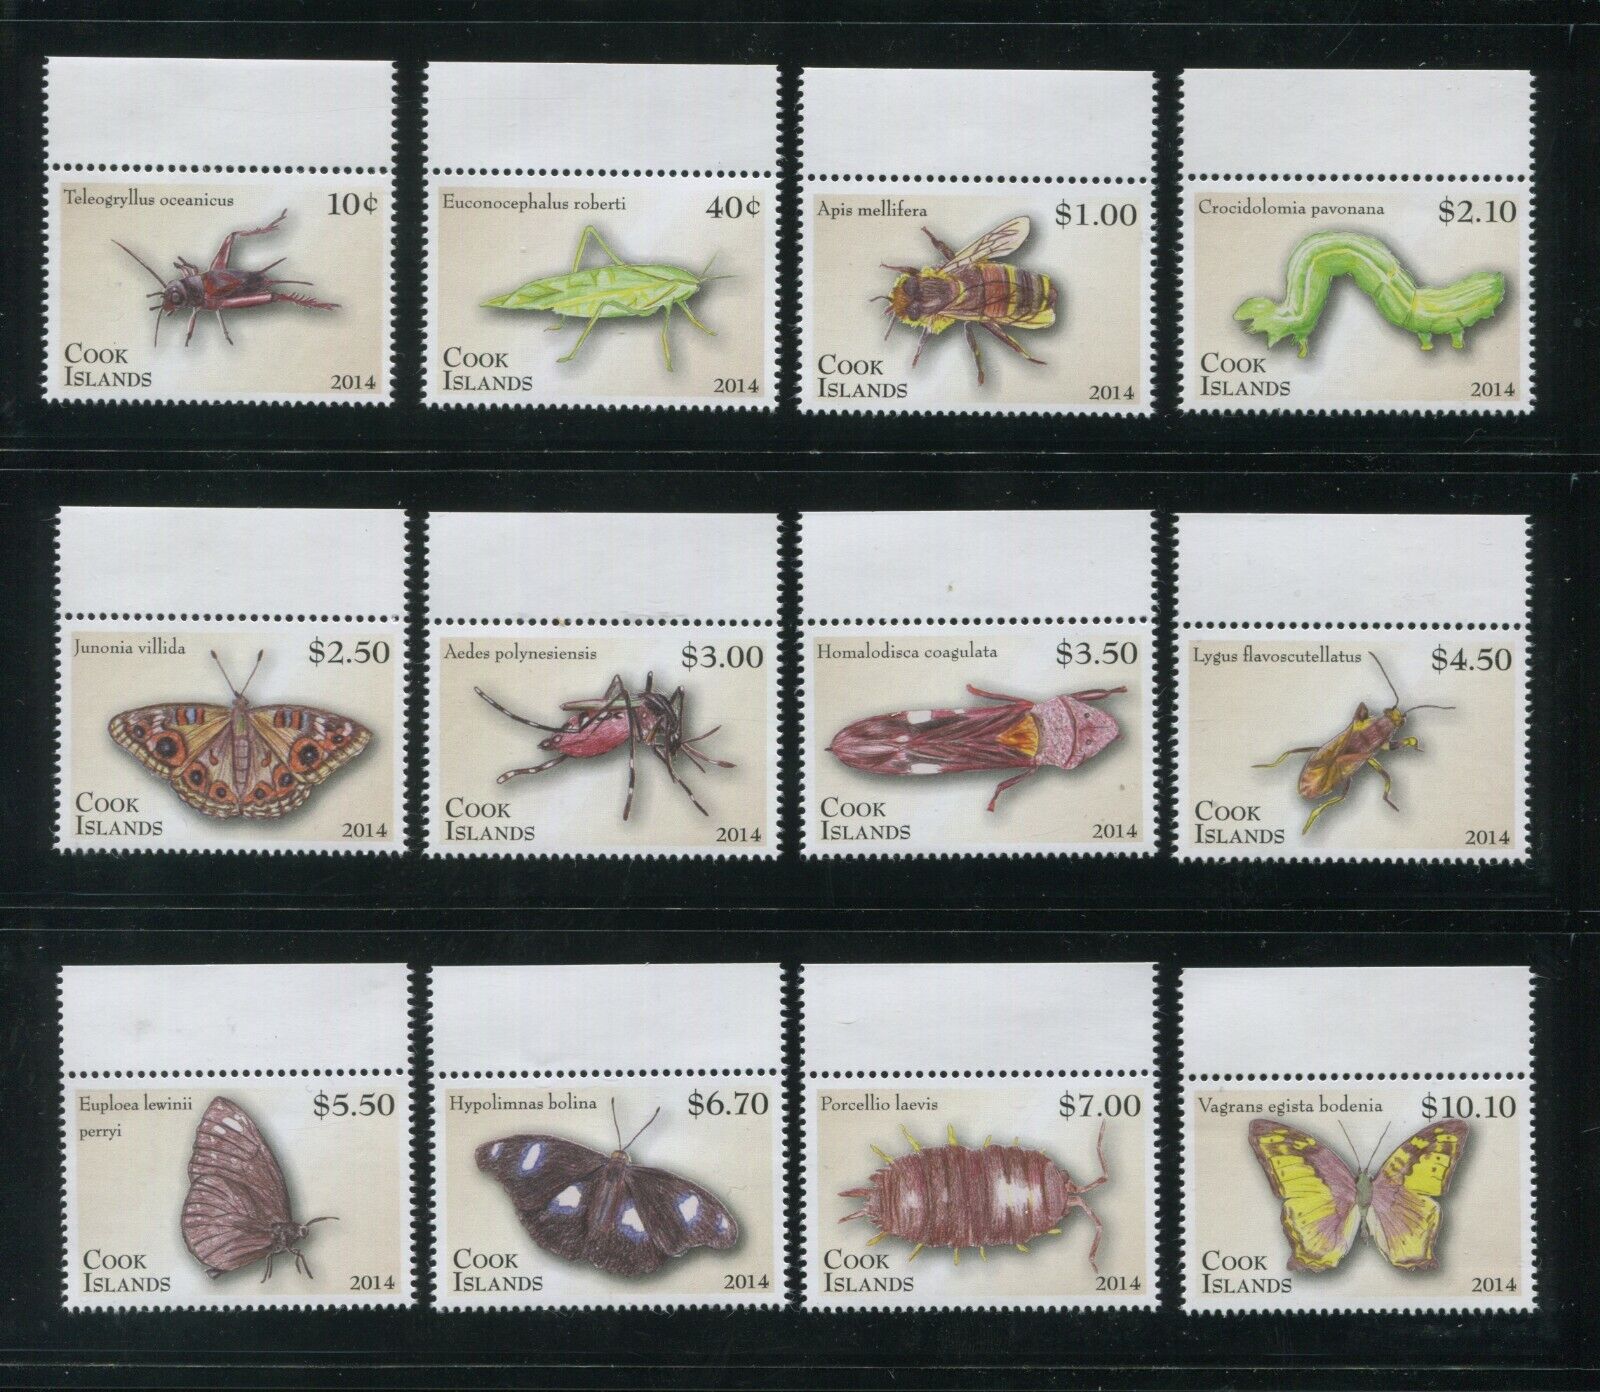 2014 Cook Islands Insects Postage Stamp Sheet #1491-1502 Mint Never Hinged Set